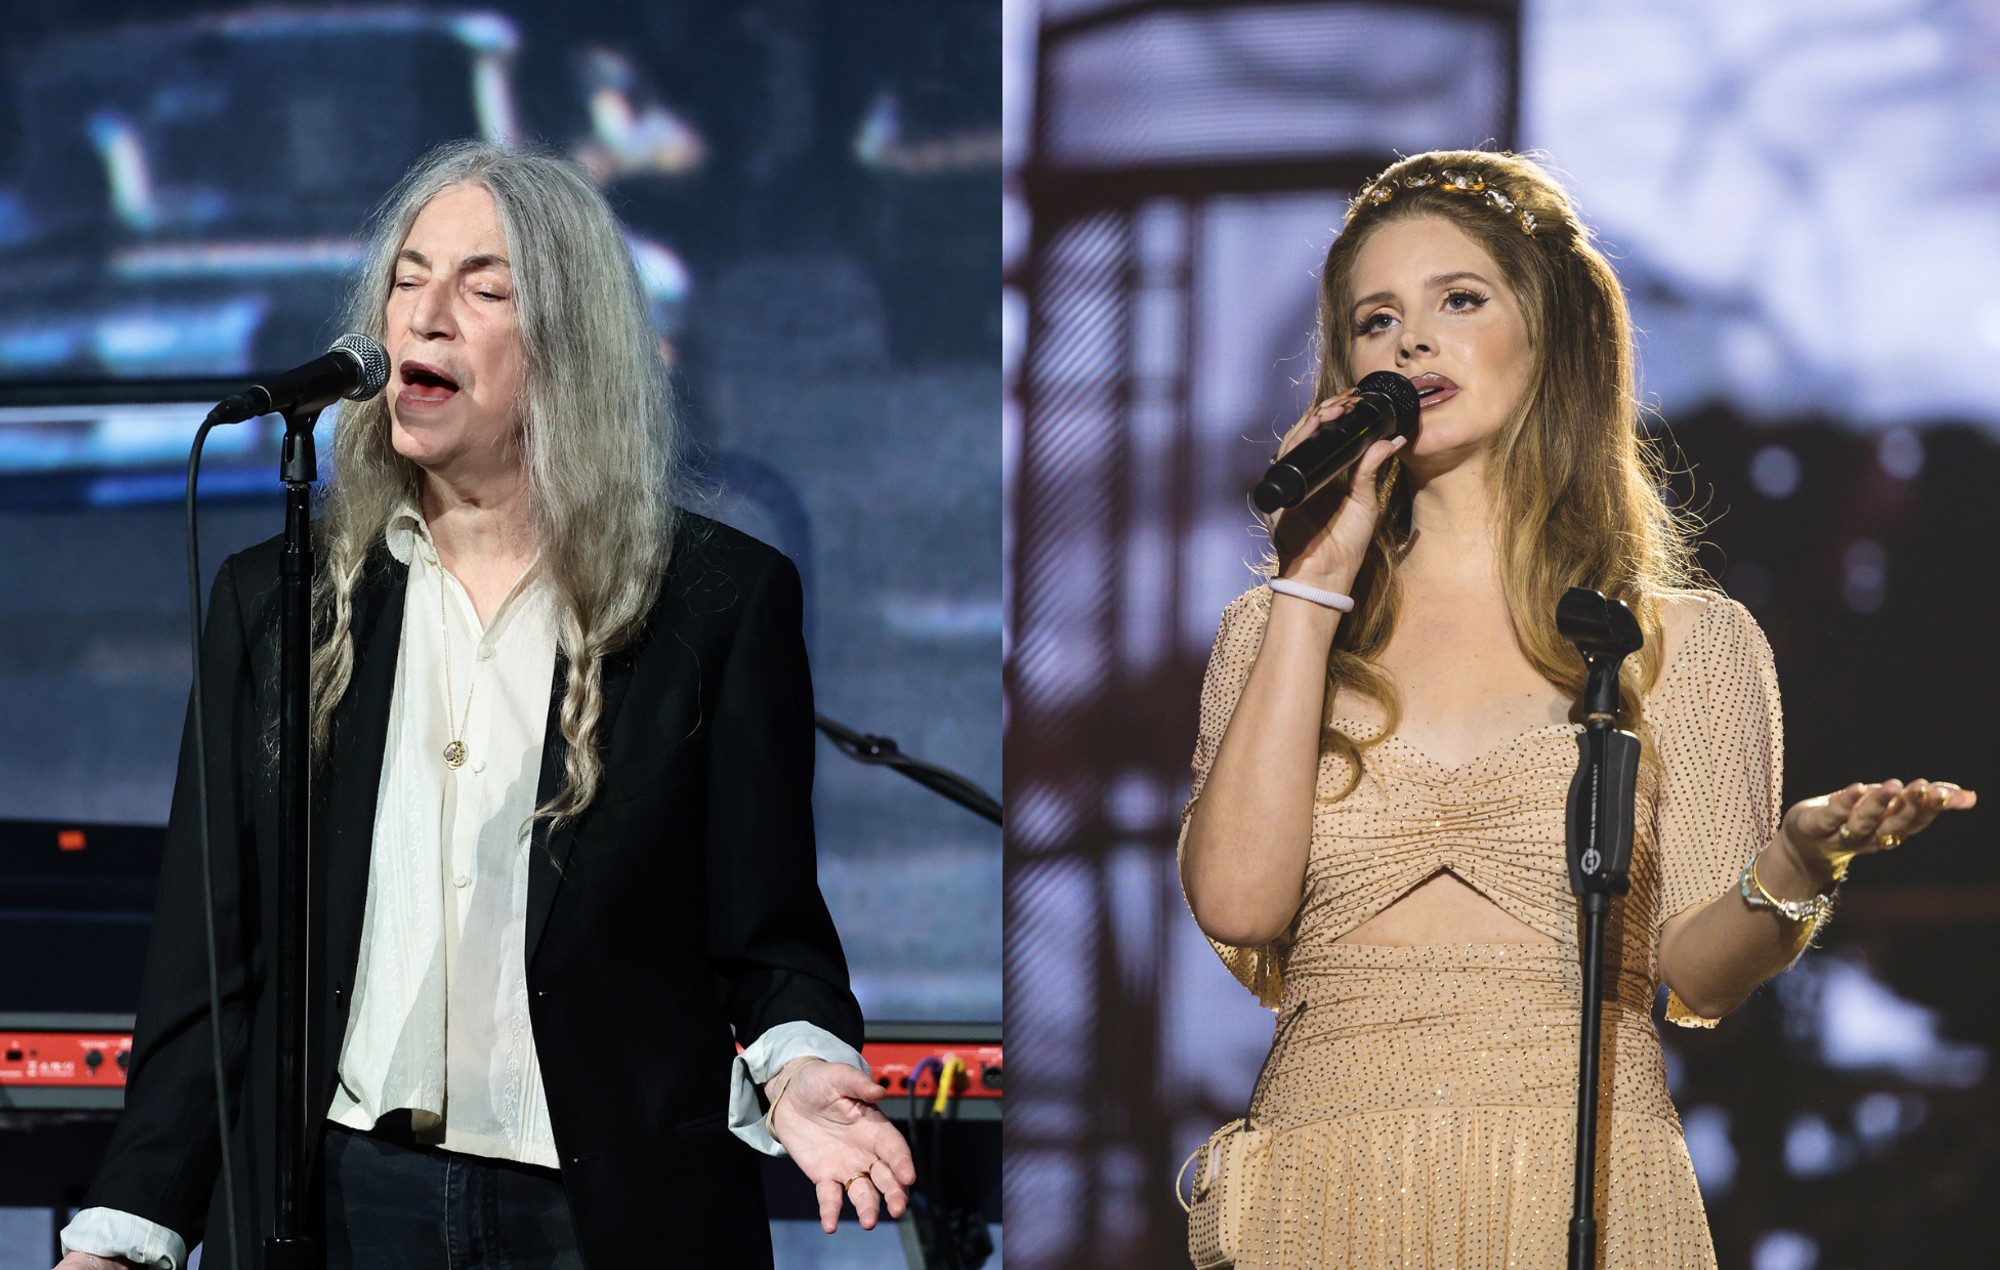 Patti Smith covers Lana Del Rey’s ‘Summertime Sadness’